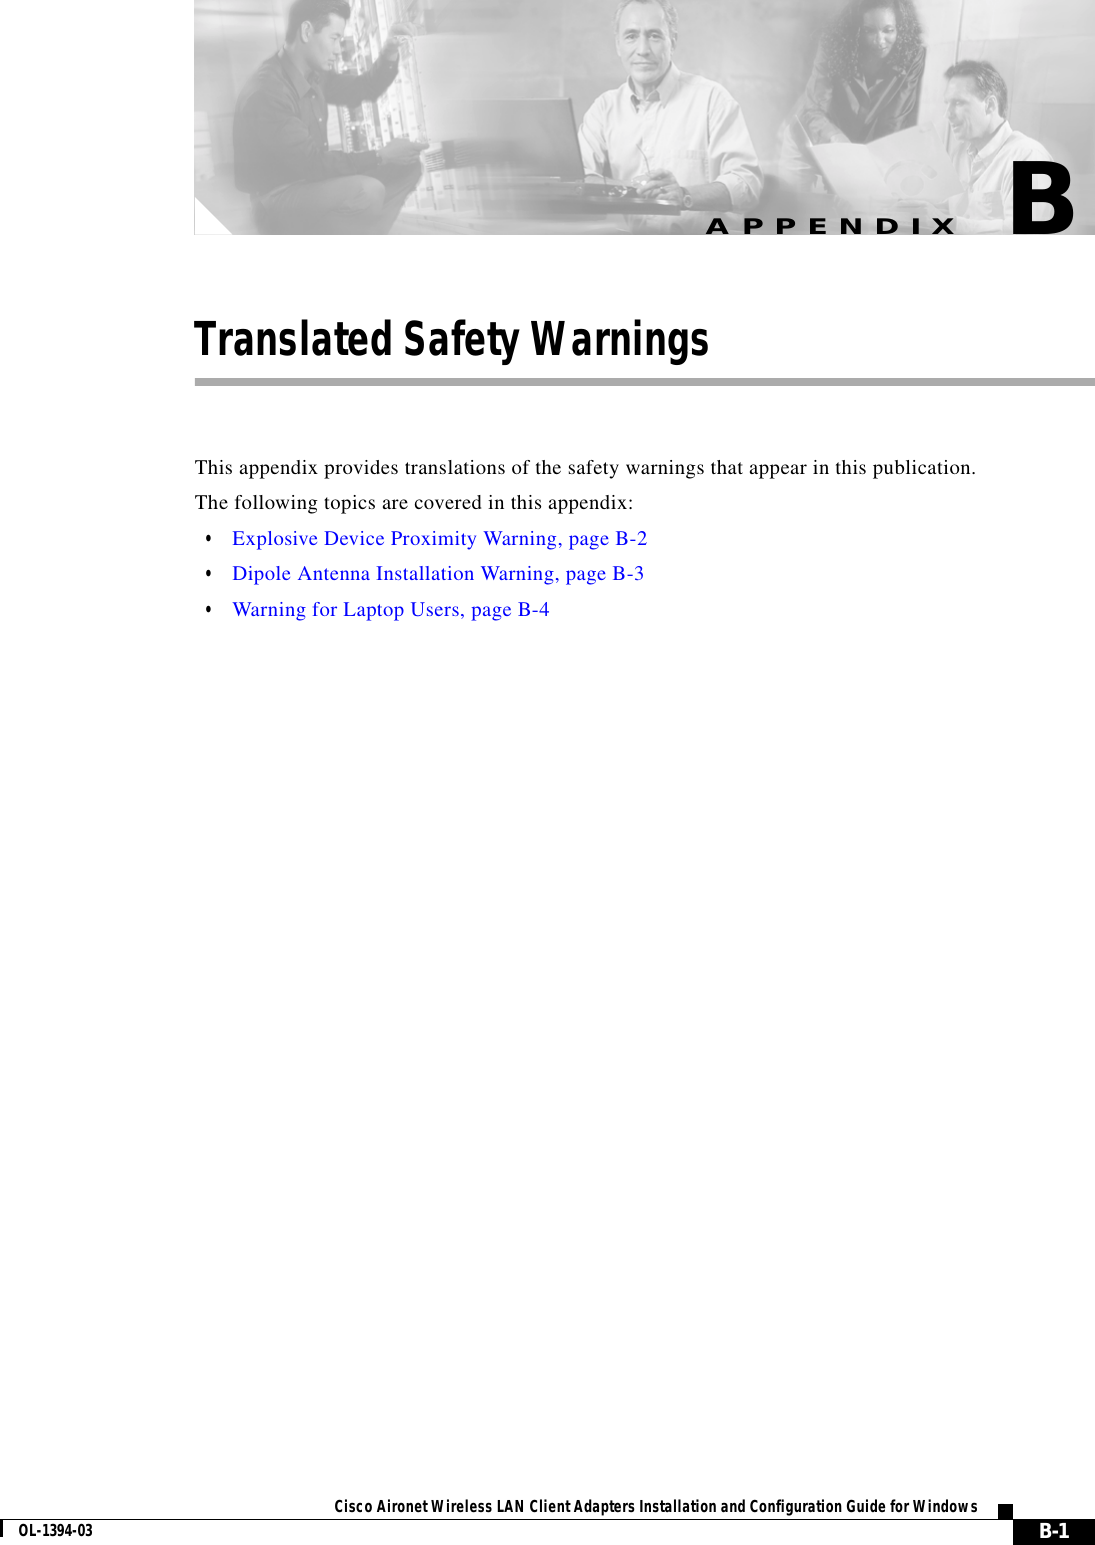 B-1Cisco Aironet Wireless LAN Client Adapters Installation and Configuration Guide for WindowsOL-1394-03APPENDIXBTranslated Safety WarningsThis appendix provides translations of the safety warnings that appear in this publication.The following topics are covered in this appendix:•Explosive Device Proximity Warning, page B-2•Dipole Antenna Installation Warning, page B-3•Warning for Laptop Users, page B-4